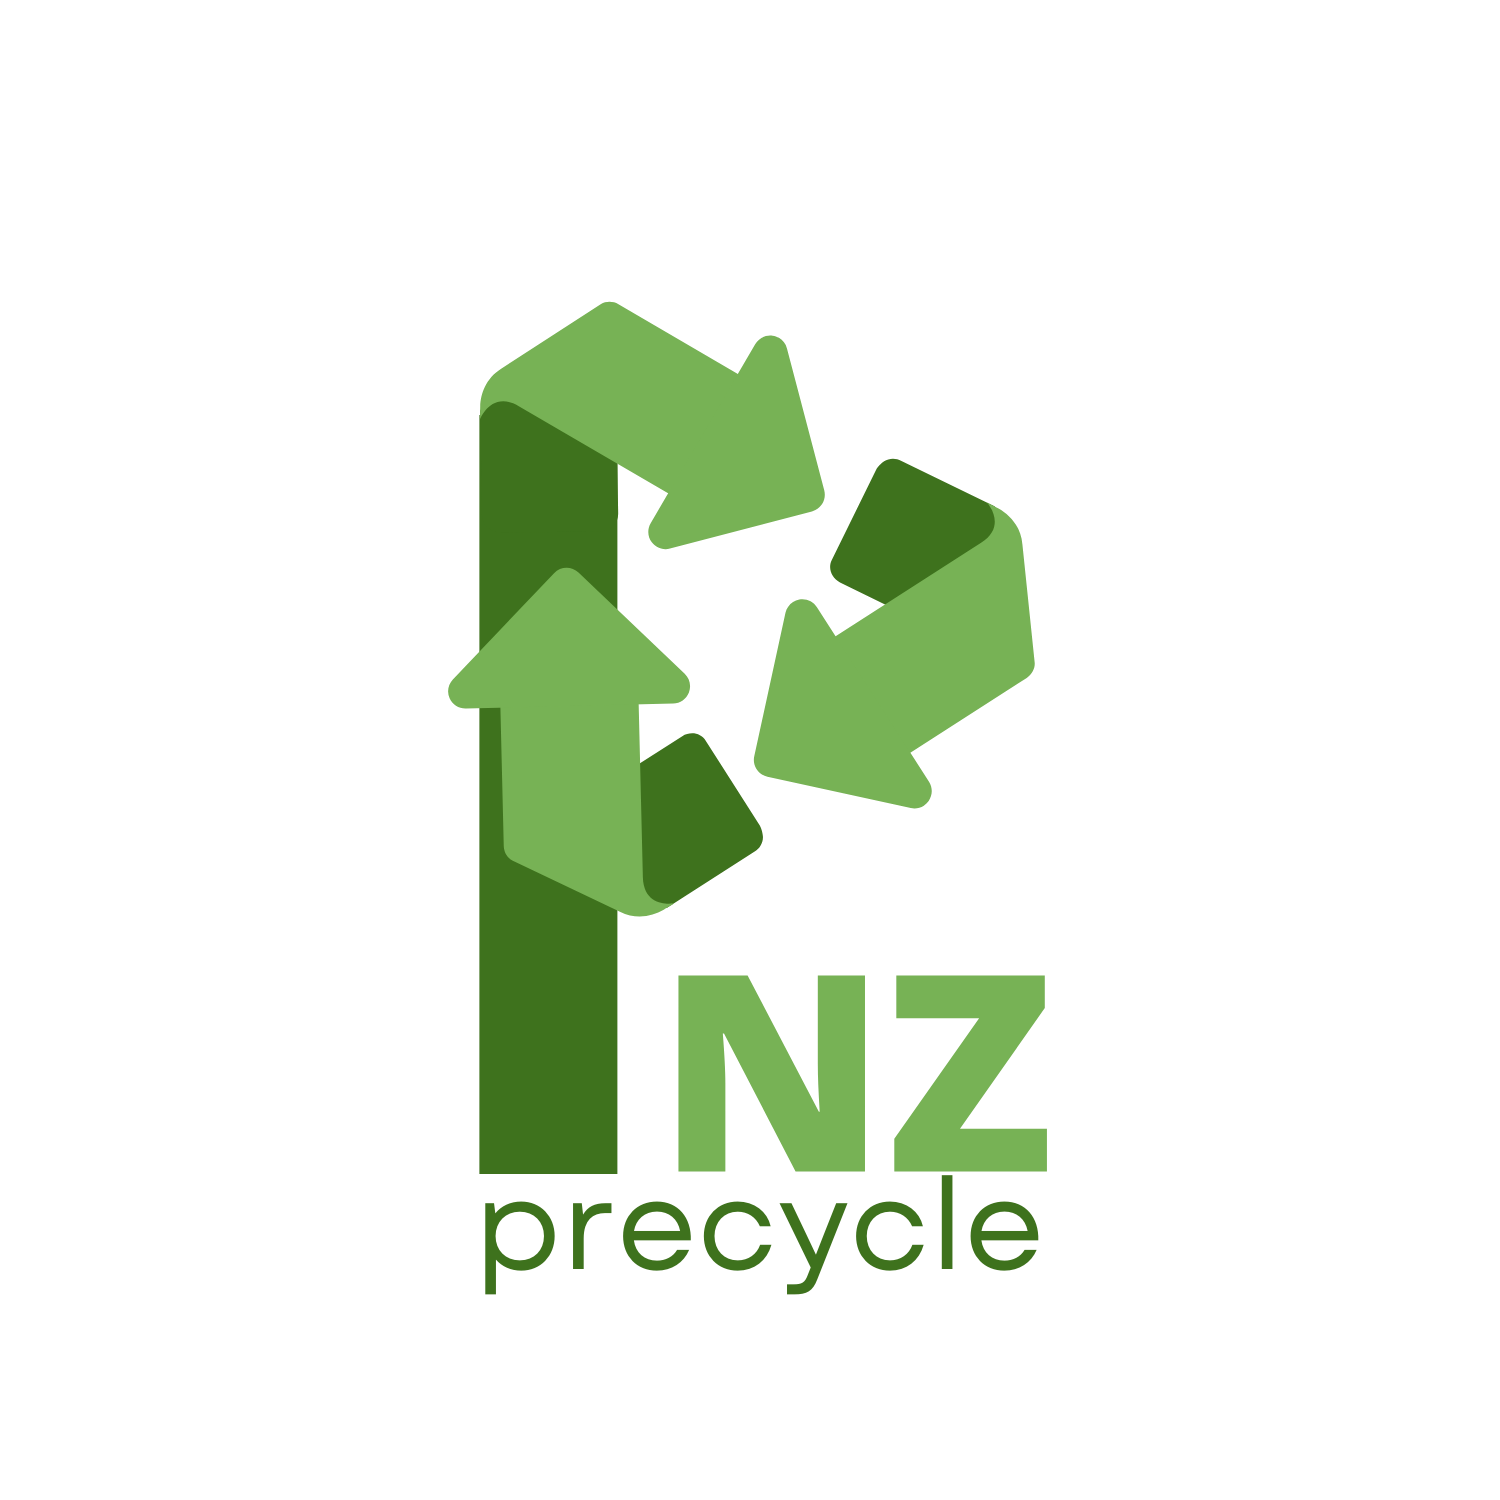 Precycle NZ